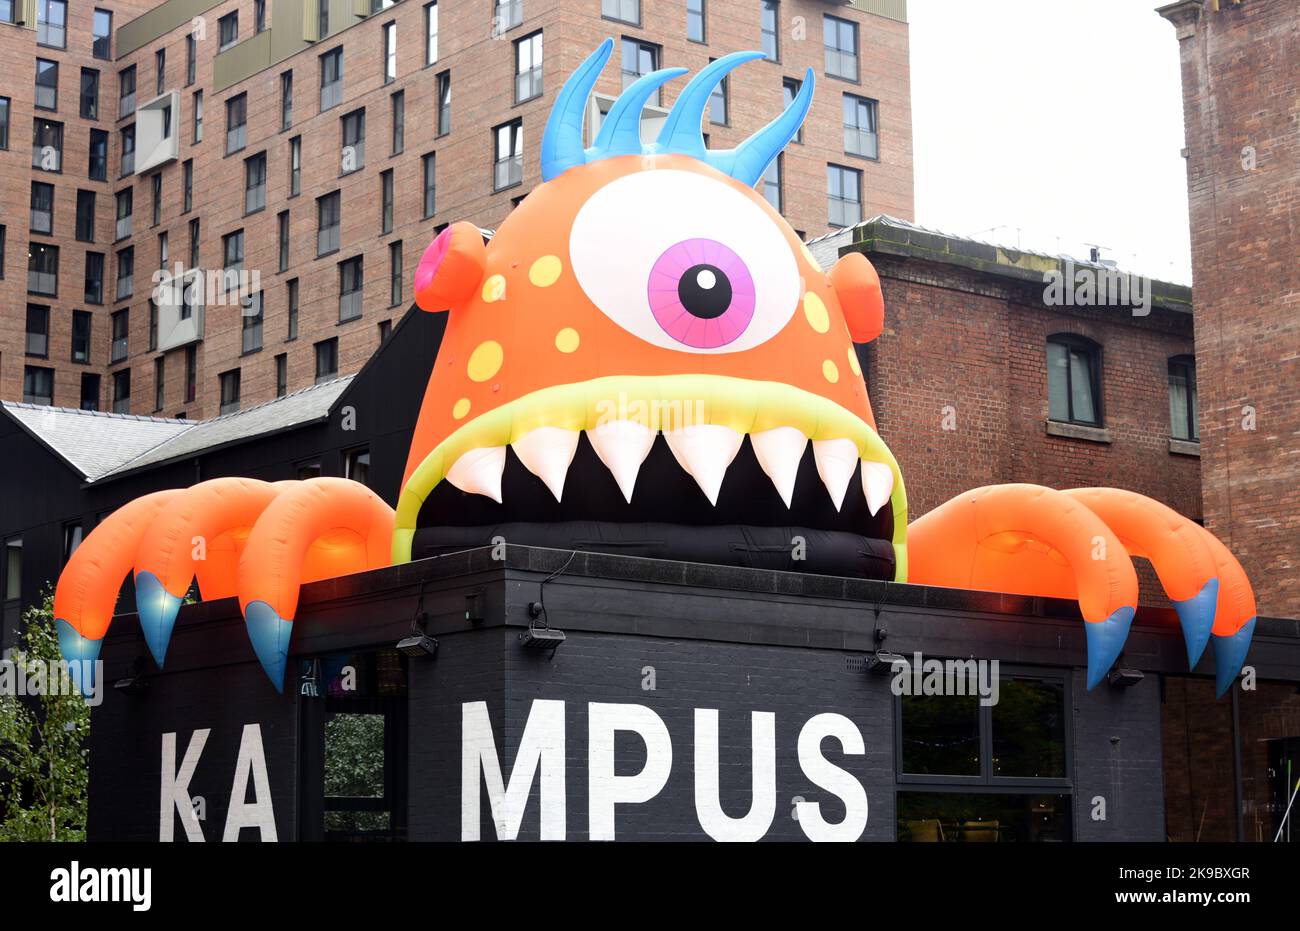 Manchester, UK. 27th October, 2022. An octopus giant inflatable monster, named Krampus, on top of Kampus, a canal-side garden neighbourhood. Halloween decorations appear in city centre Manchester, England, United Kingdom, ready for the  celebration of Halloween or Hallowe'en, as observed in many countries on 31 October, the eve of the Western Christian feast of All Hallows' Day. The festival begins the observance of Allhallowtide,a time to remember the dead, including saints or hallows and all the departed. Credit: Terry Waller/Alamy Live News Stock Photo